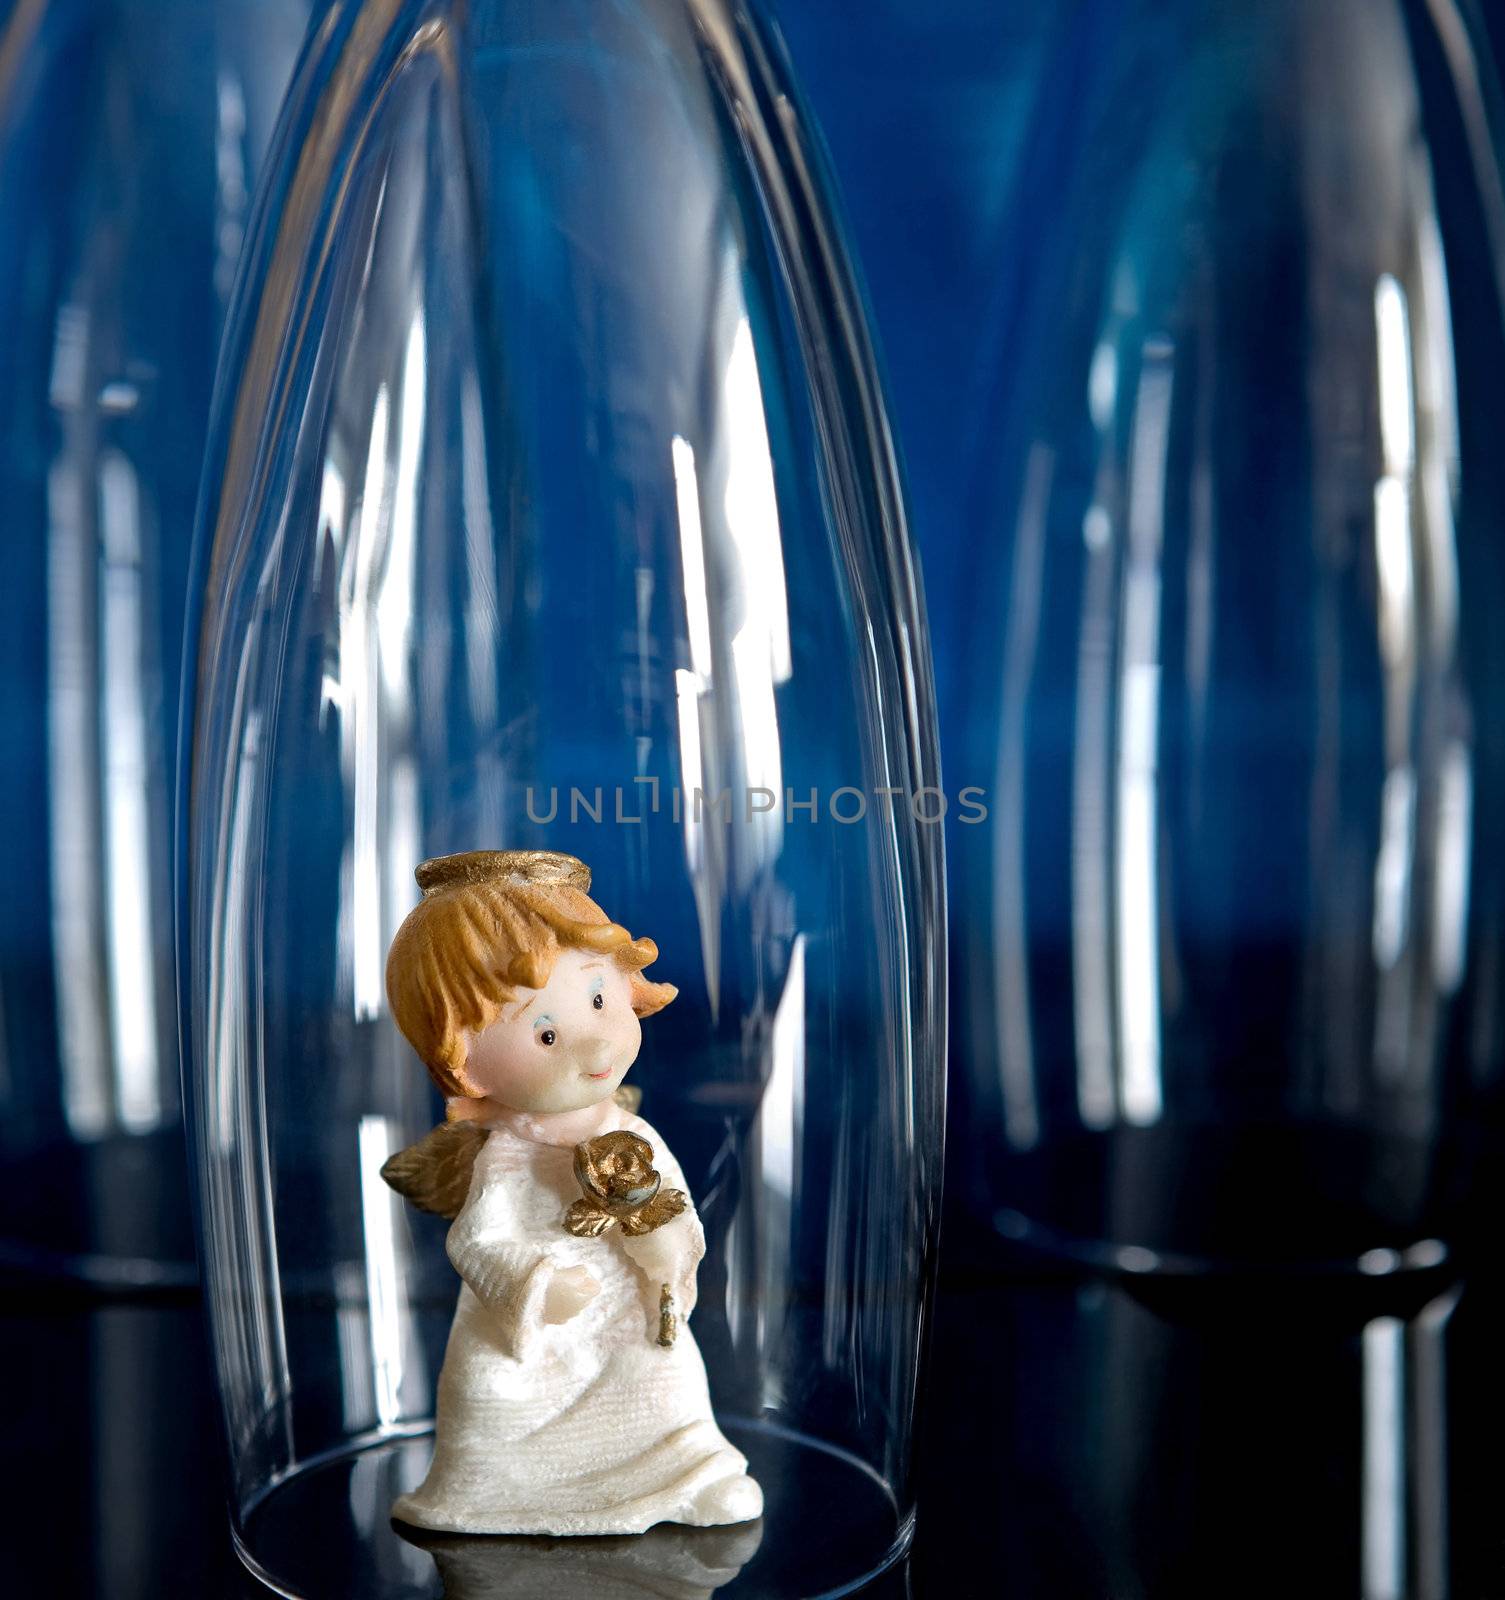 Toy angel between the glass on blue background